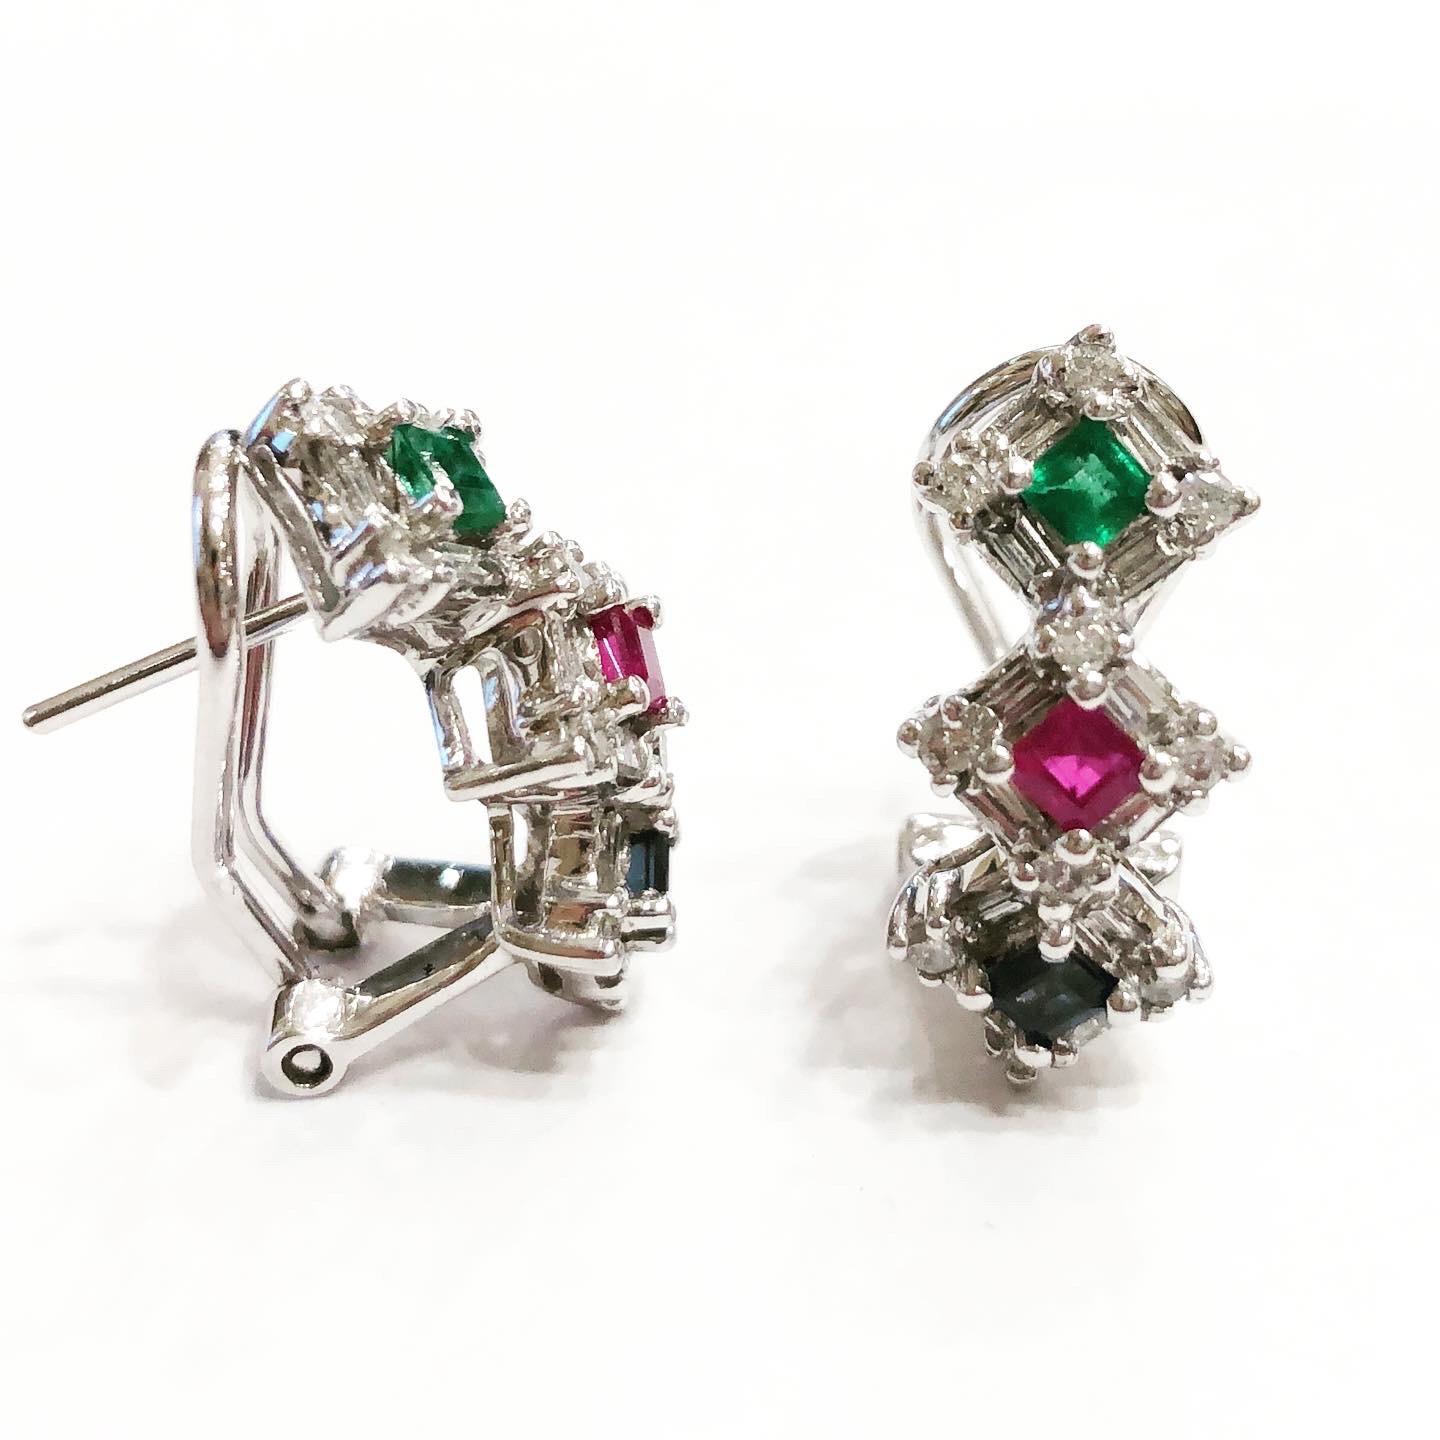 Lovely Emerald, Sapphire, Ruby and Diamond half hoop clipon 14k gold earrings.
Condition: Good..
14 karat white gold.
Square cut ruby, sapphire and Emeral.
Brilliant and baguette cut diamonds.
Diamond approximate carat weight: 1.5 carat.
Ruby